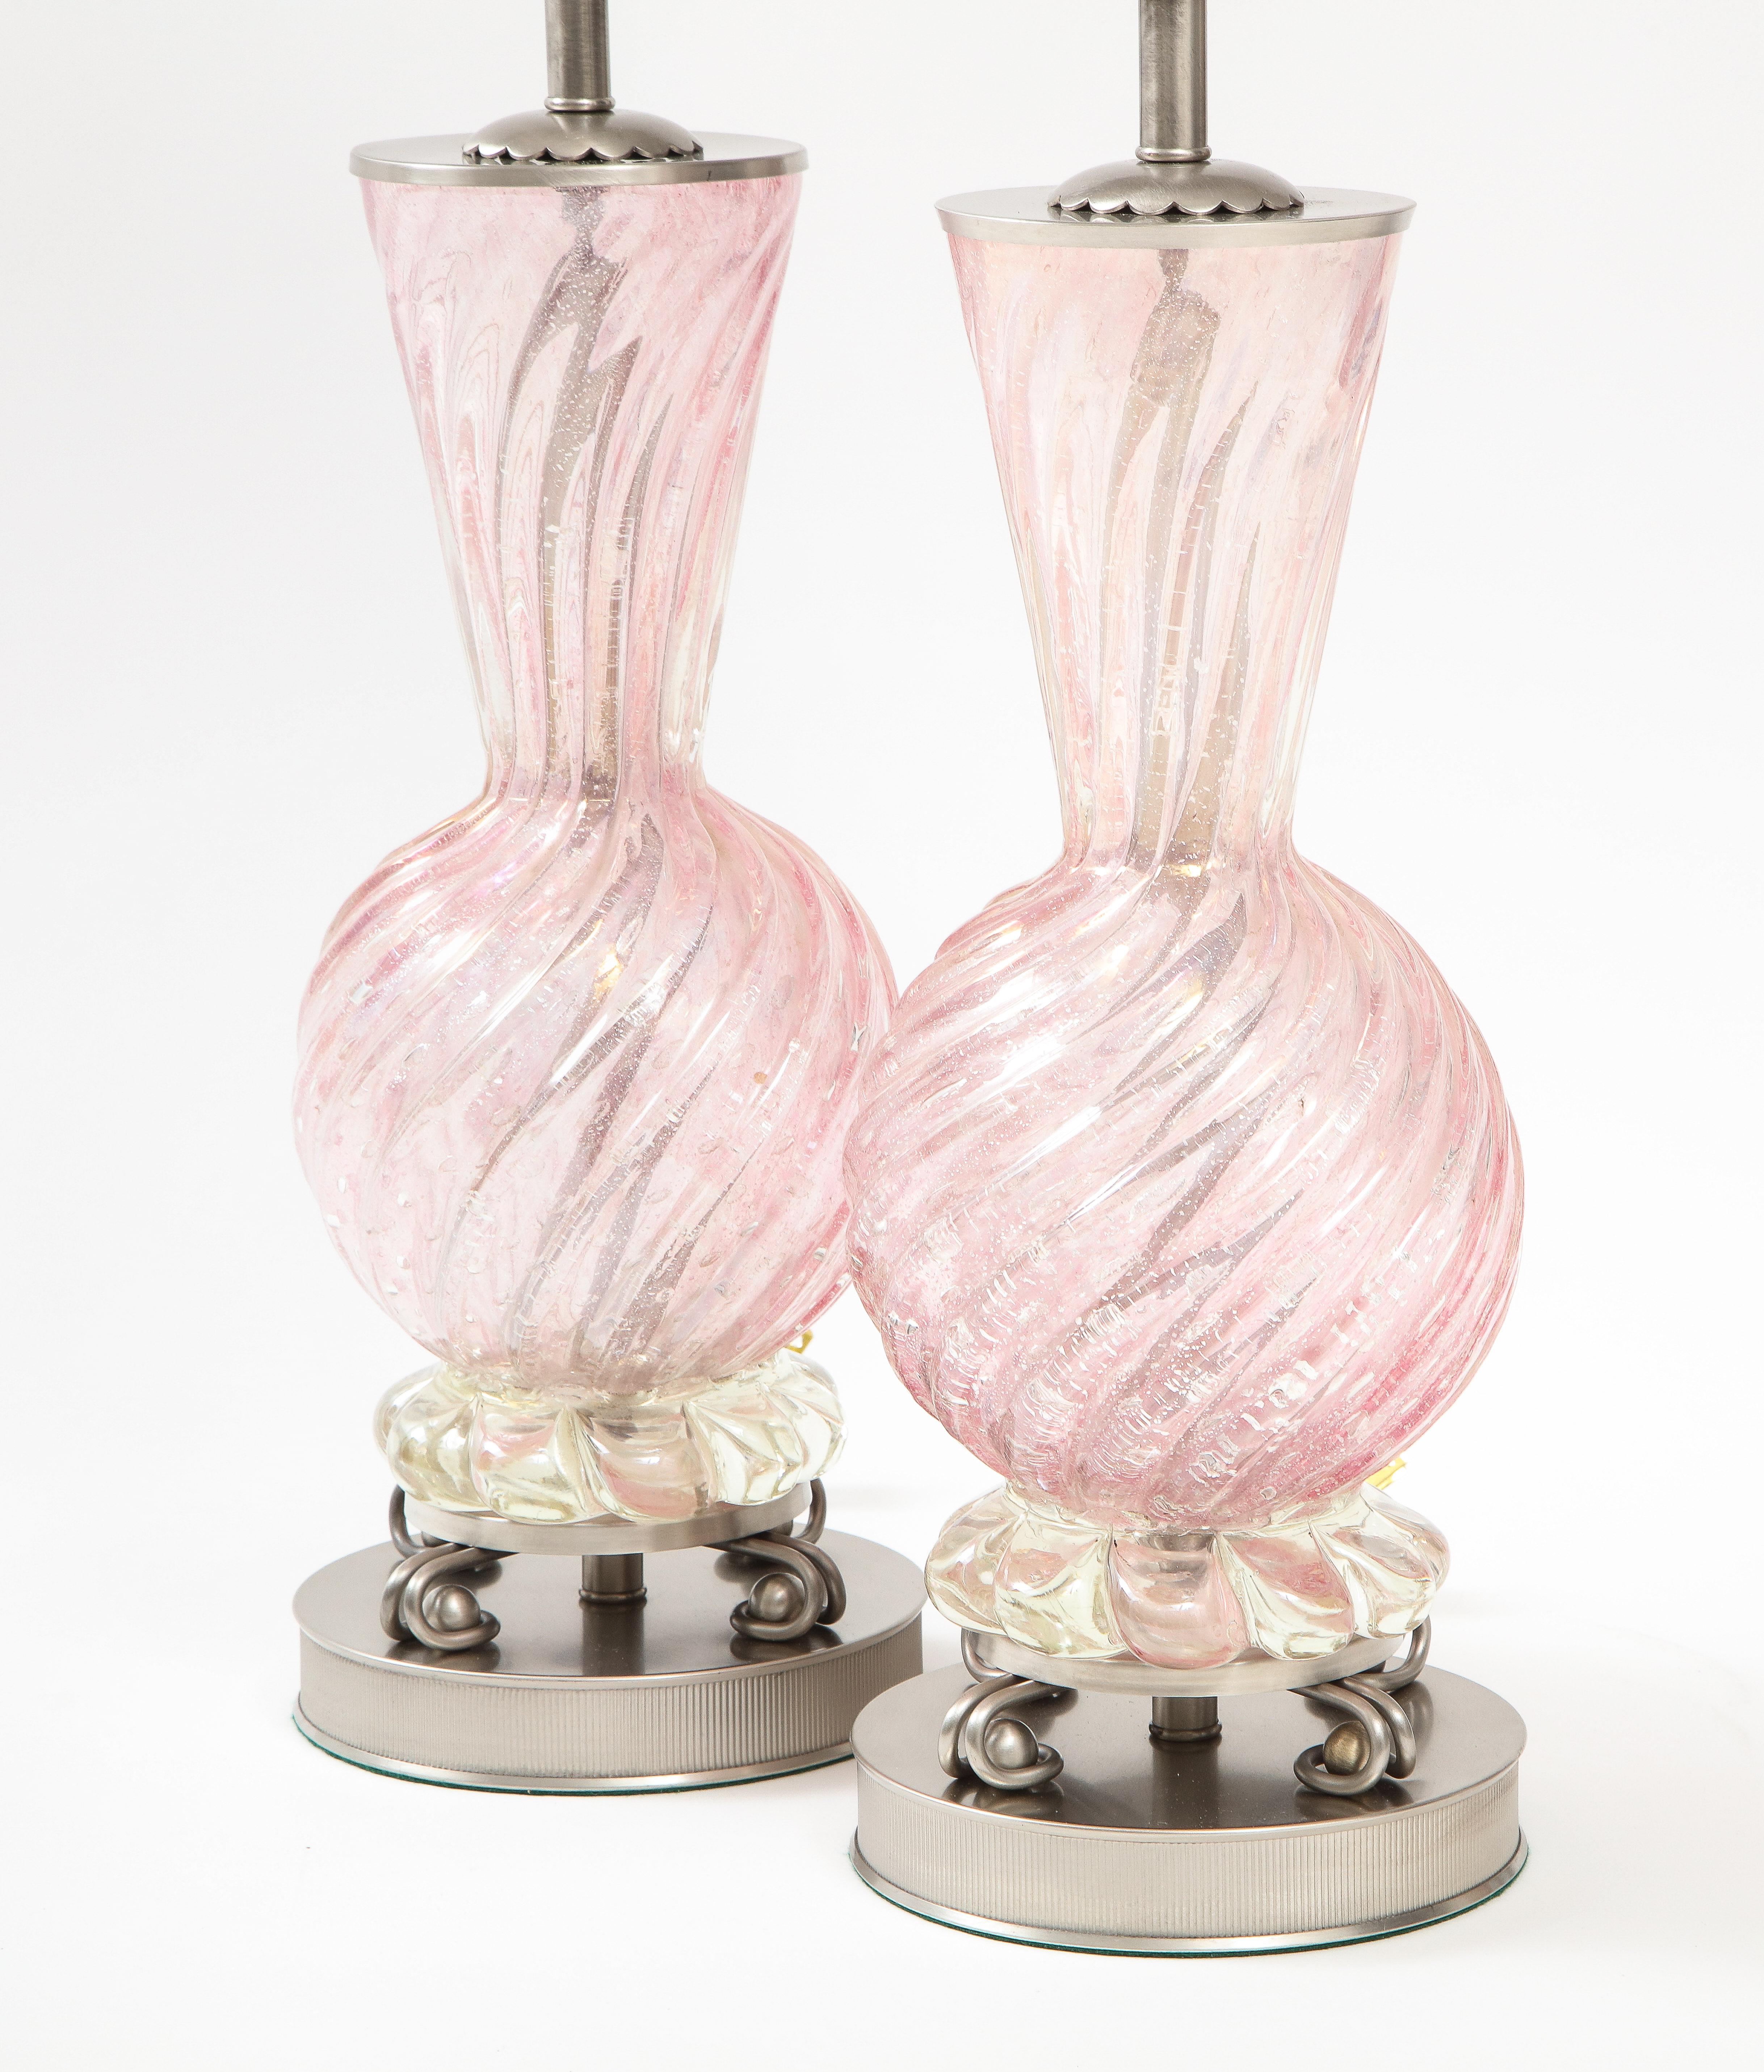 Barovier Pale Pink Murano Glass Lamps In Excellent Condition For Sale In New York, NY